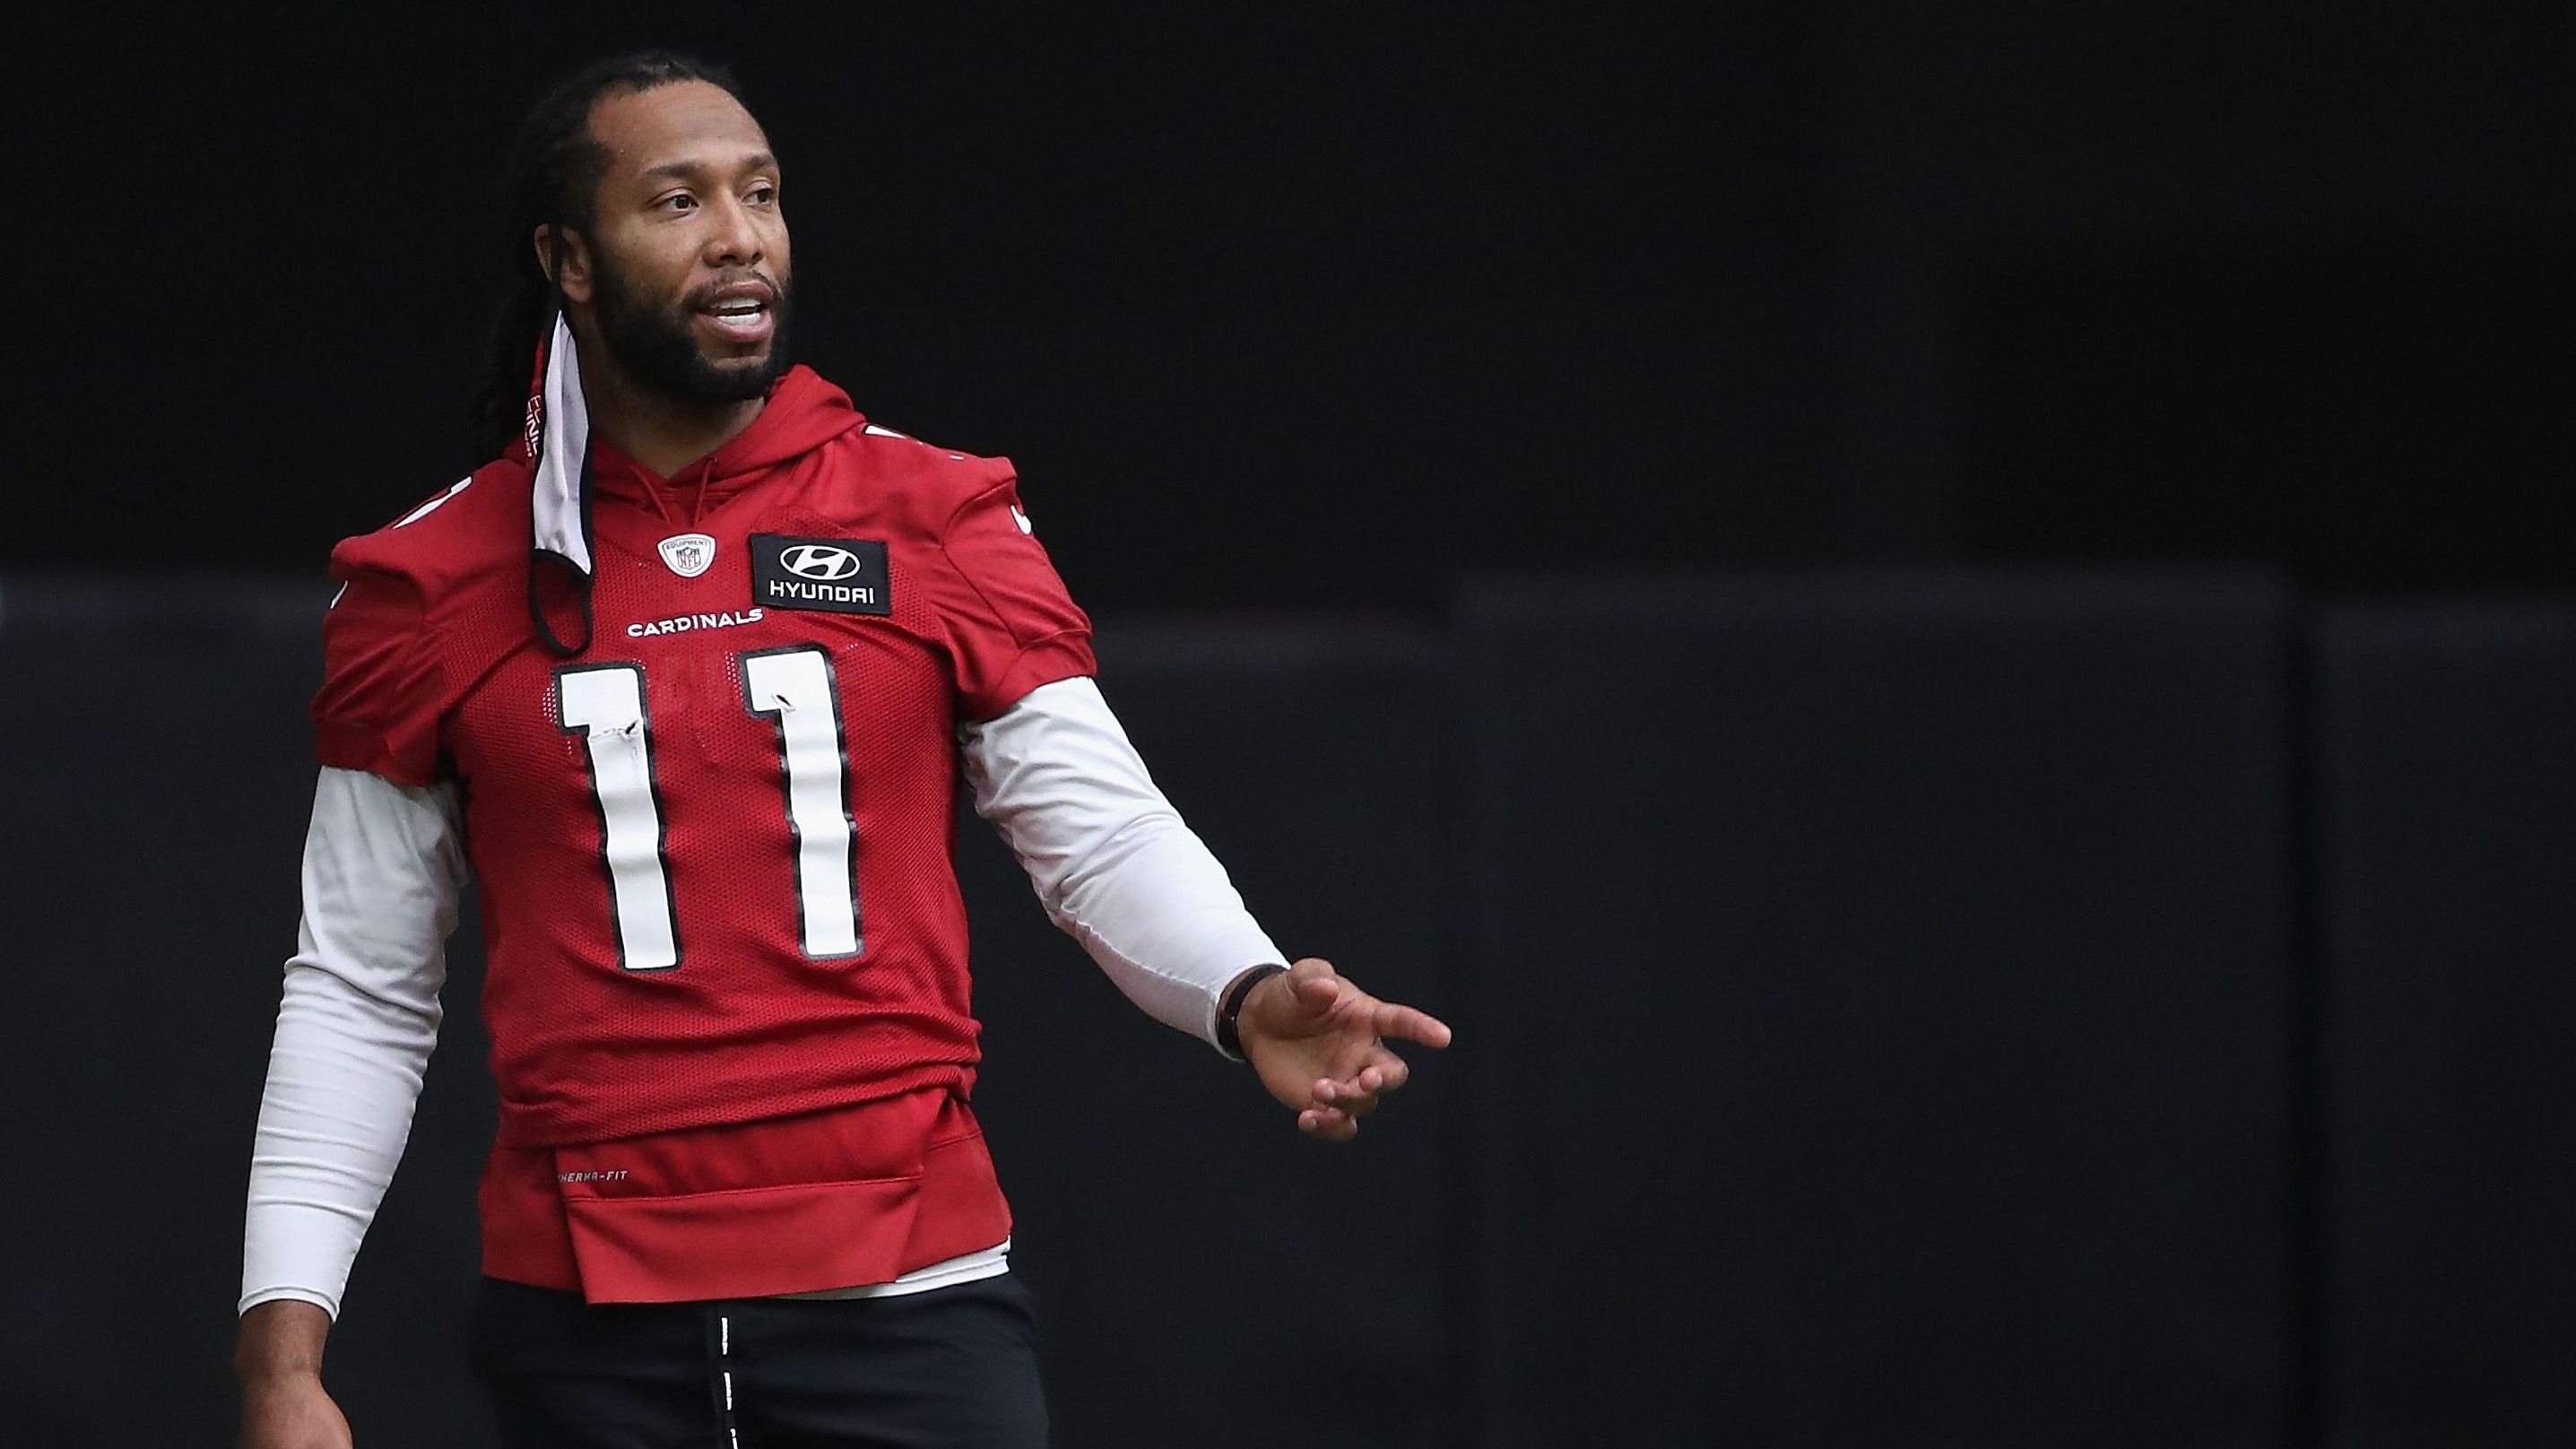 <strong>11: Larry Fitzgerald</strong><br>Team: Arizona Cardinals<br>Position: Wide Receiver<br>Erfolge: Elfmaliger Pro Bowler, 2016 Walter Payton NFL Man of the Year<br>Honorable Mentions: Julio Jones, Norm van Brocklin, Micah Parsons